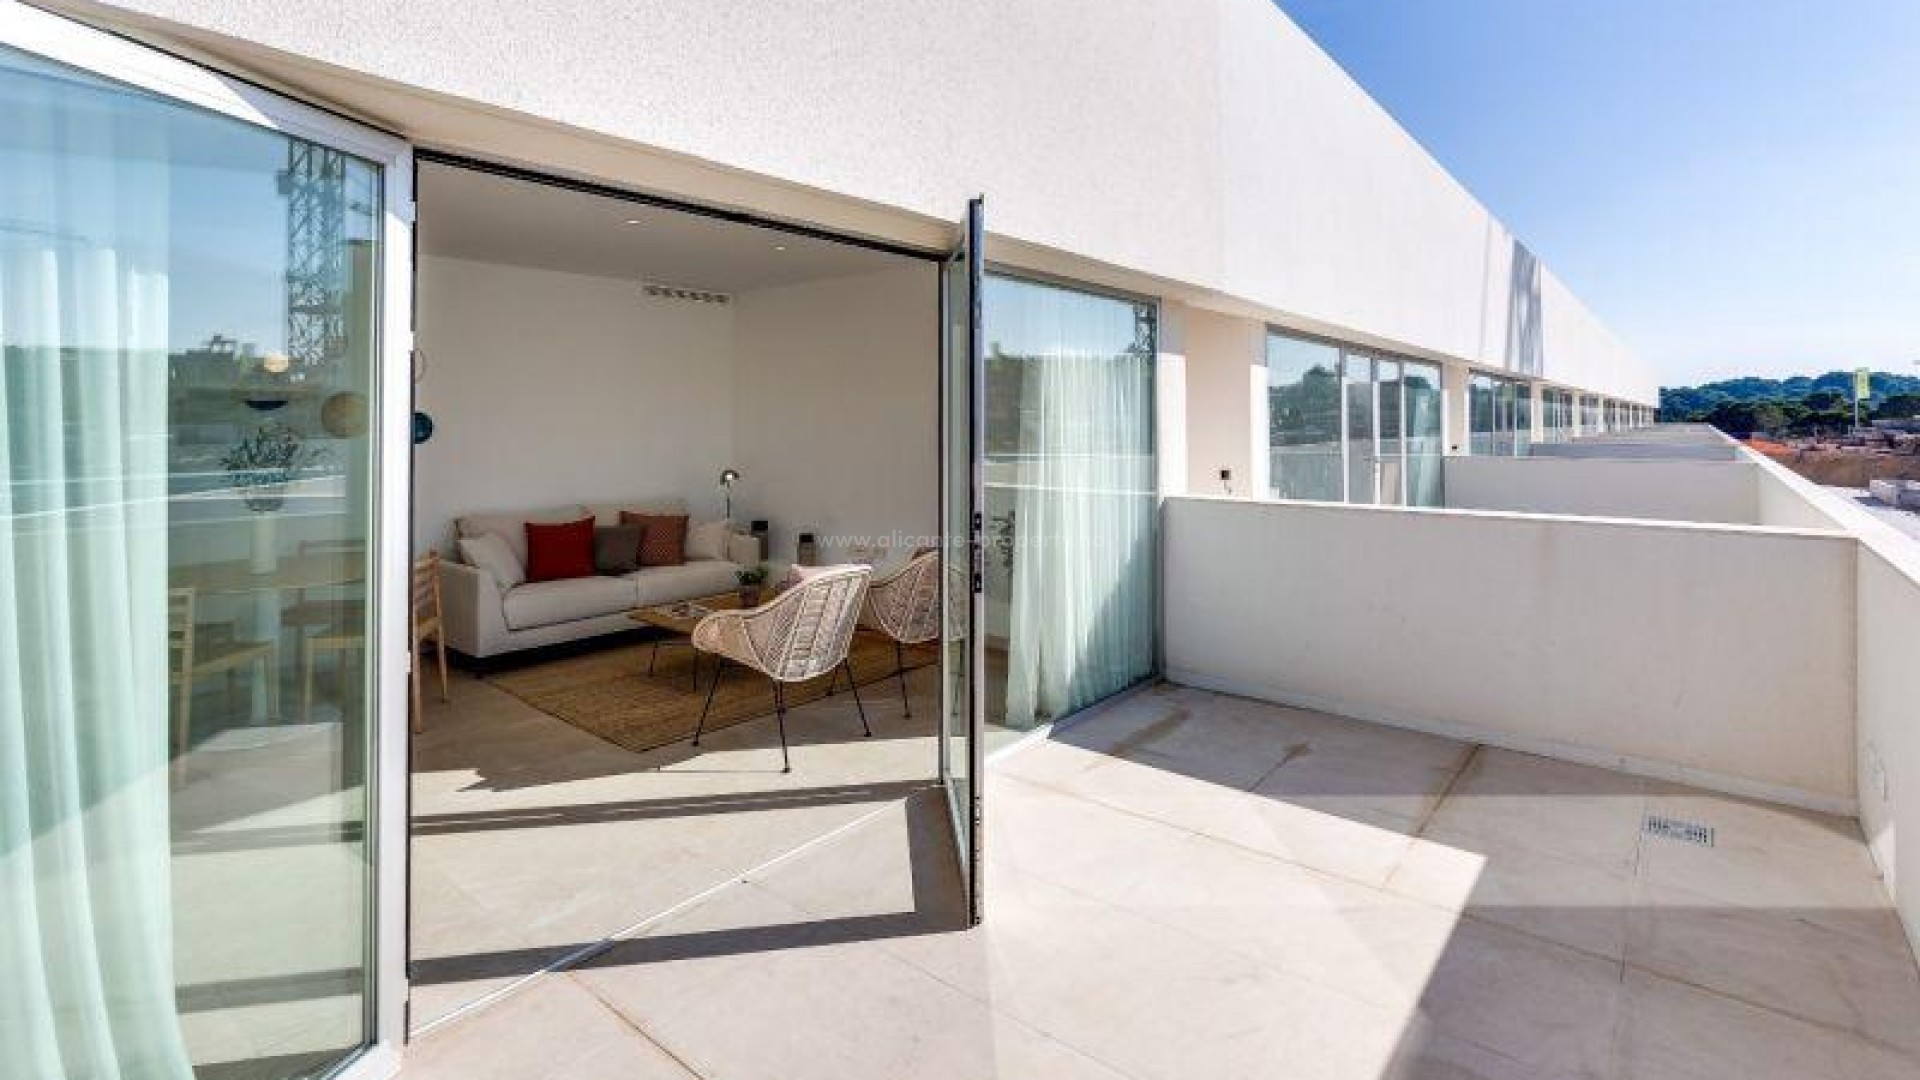 New residential building of bungalows in Los Balcones, Torrevieja, Alicante, 2/3 bedrooms. The common areas are equipped with a fantastic 200 m2 infinity pool